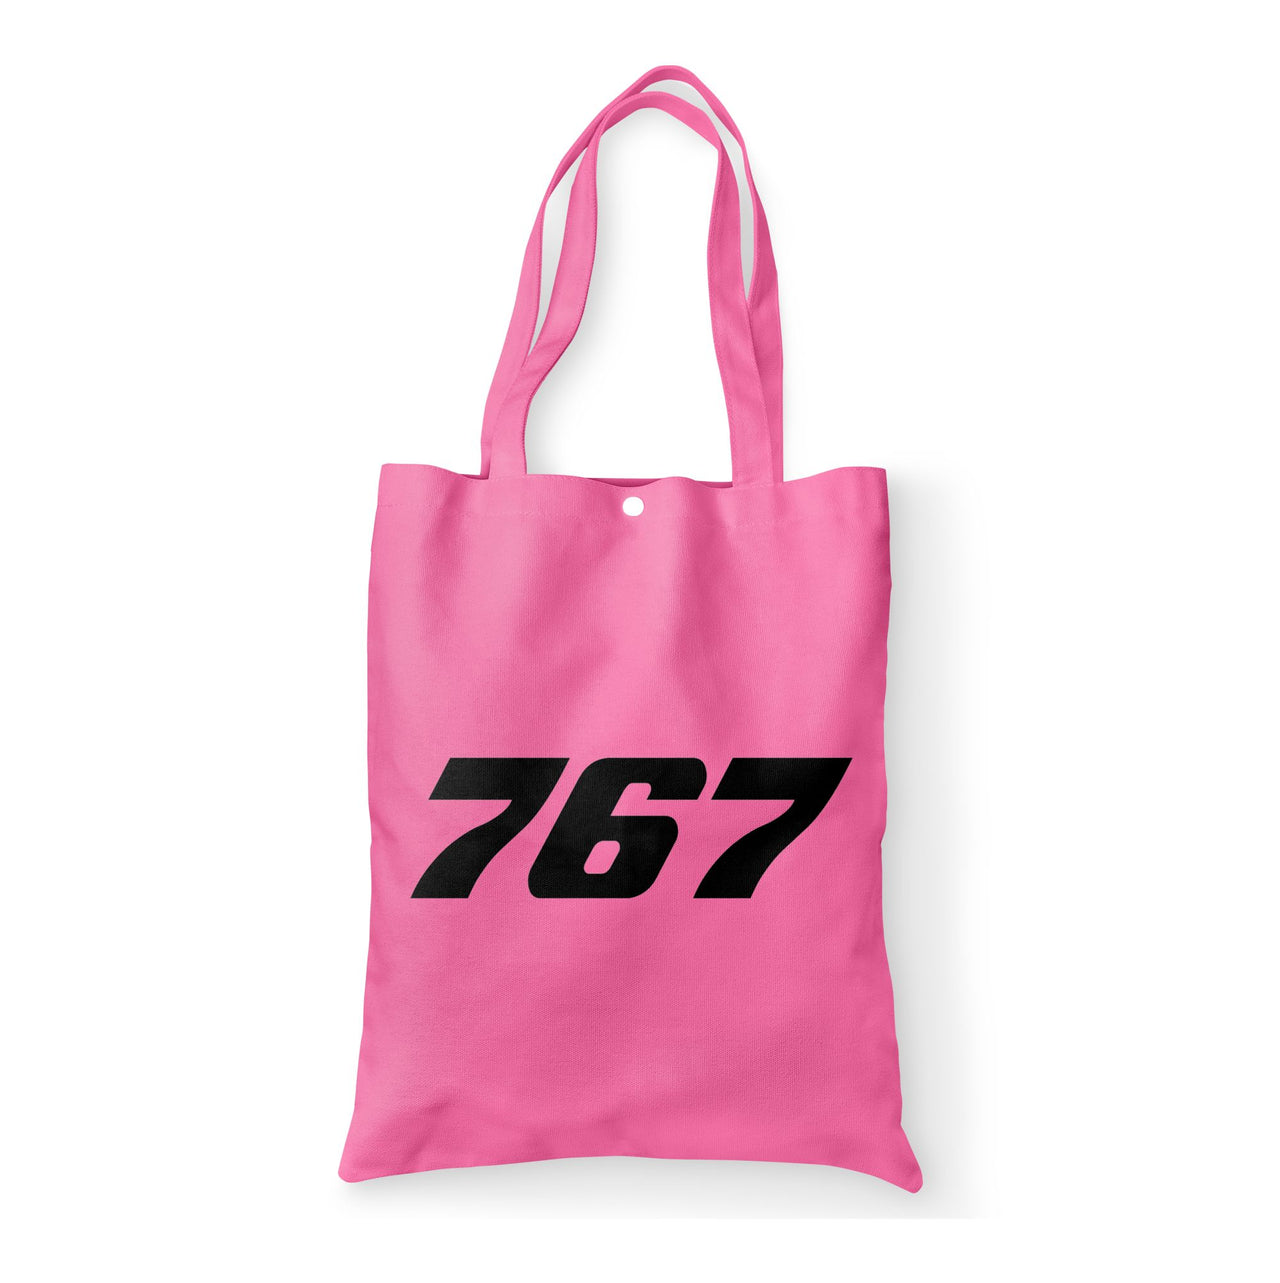 767 Flat Text Designed Tote Bags